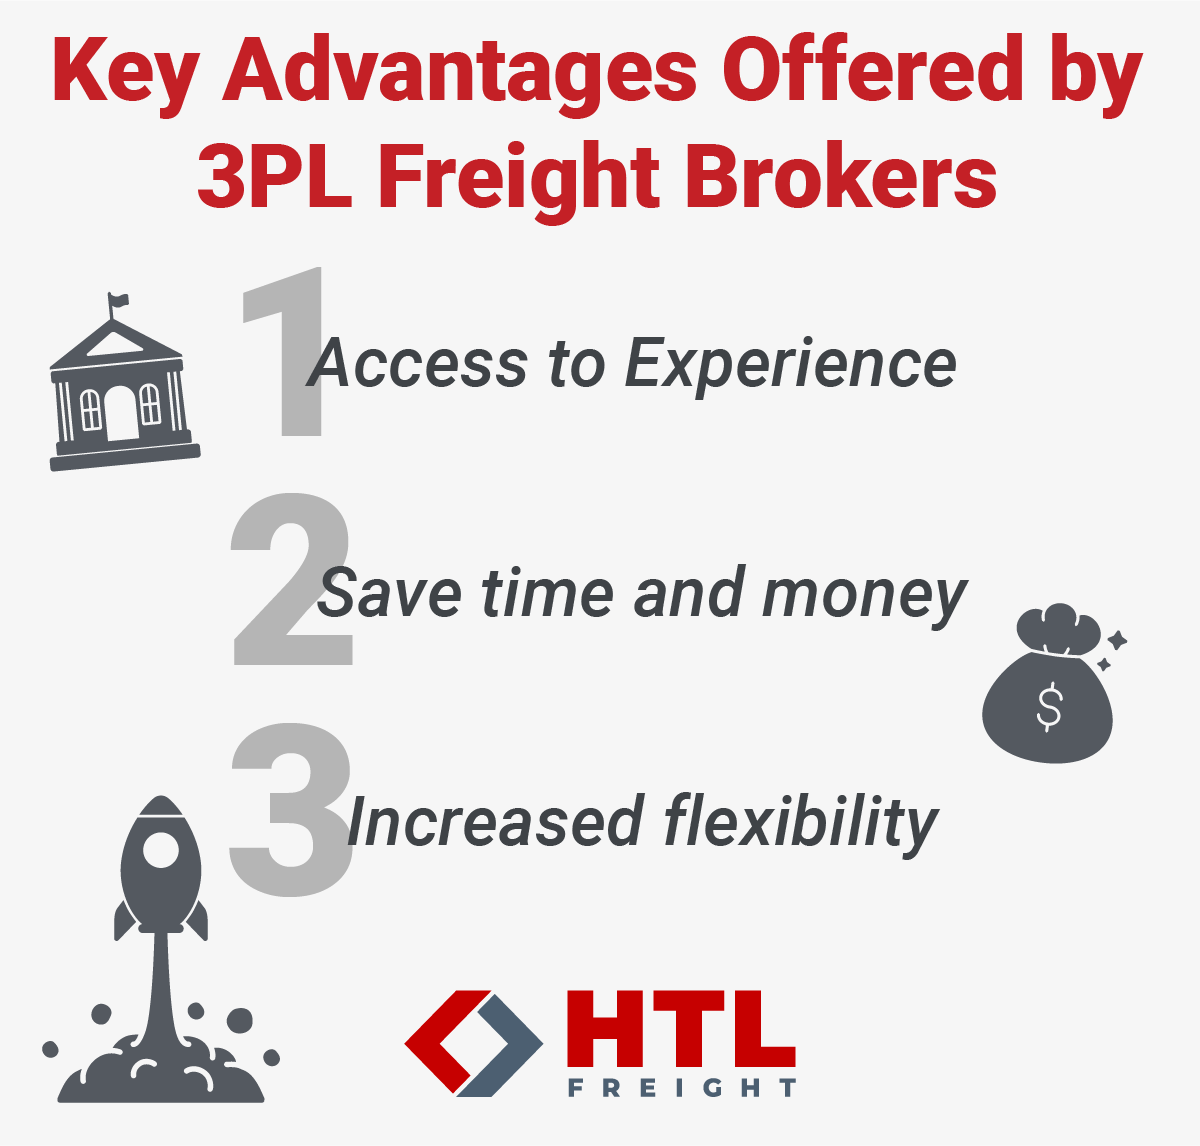 Key Advantages Offered by 3PL Freight Brokers